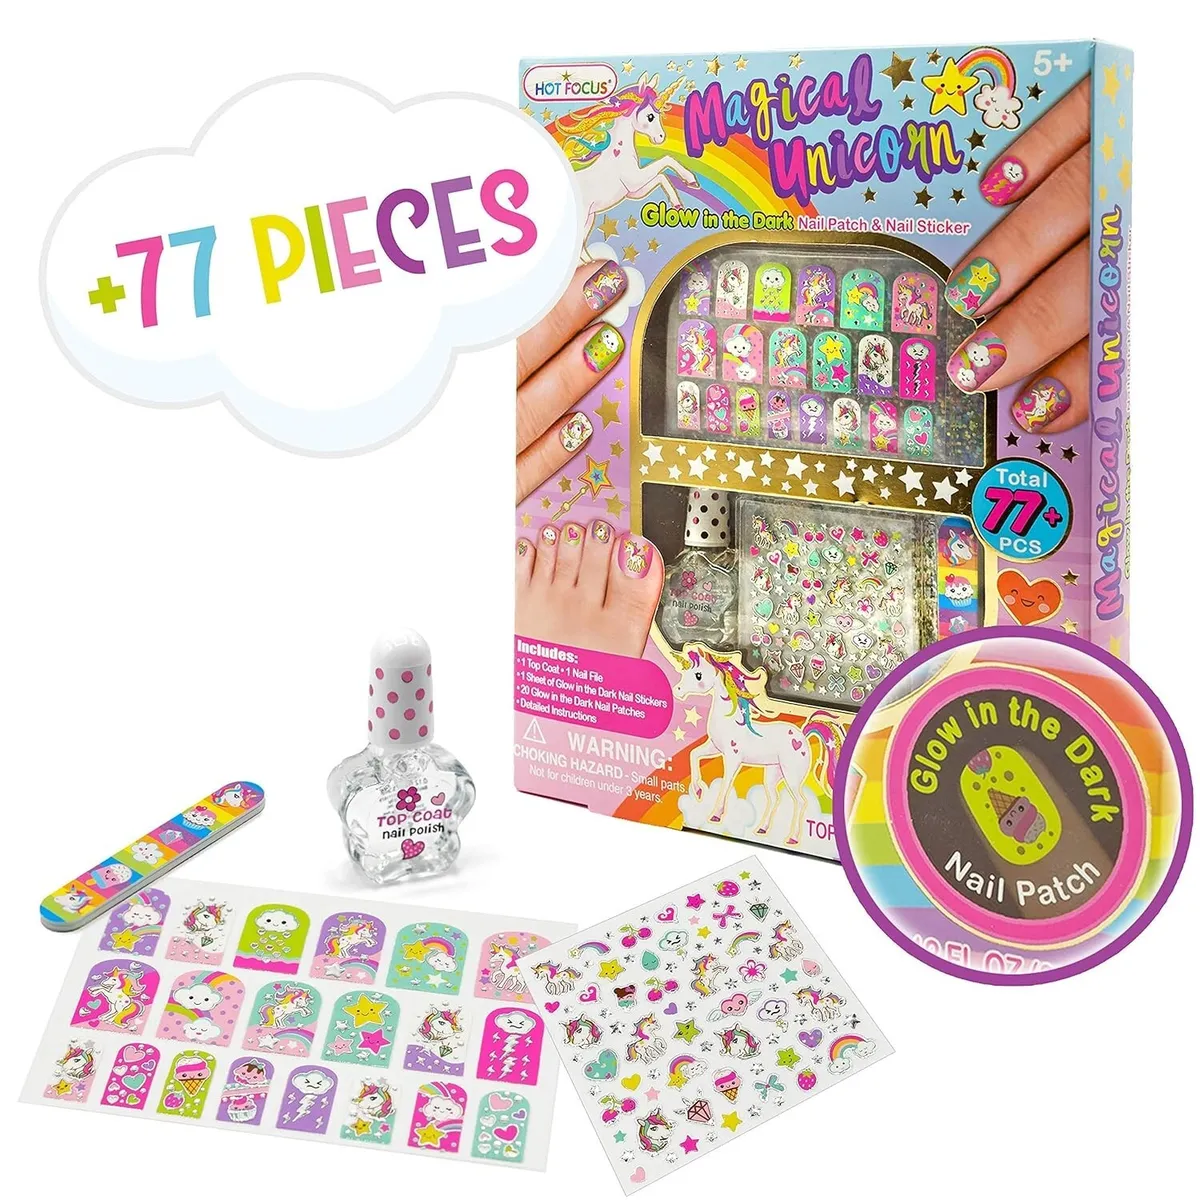 Hot Focus Unicorn Nail Art Kit- Glow in The Dark Nail Polish,Patches,Sticker,Nail File for Kids